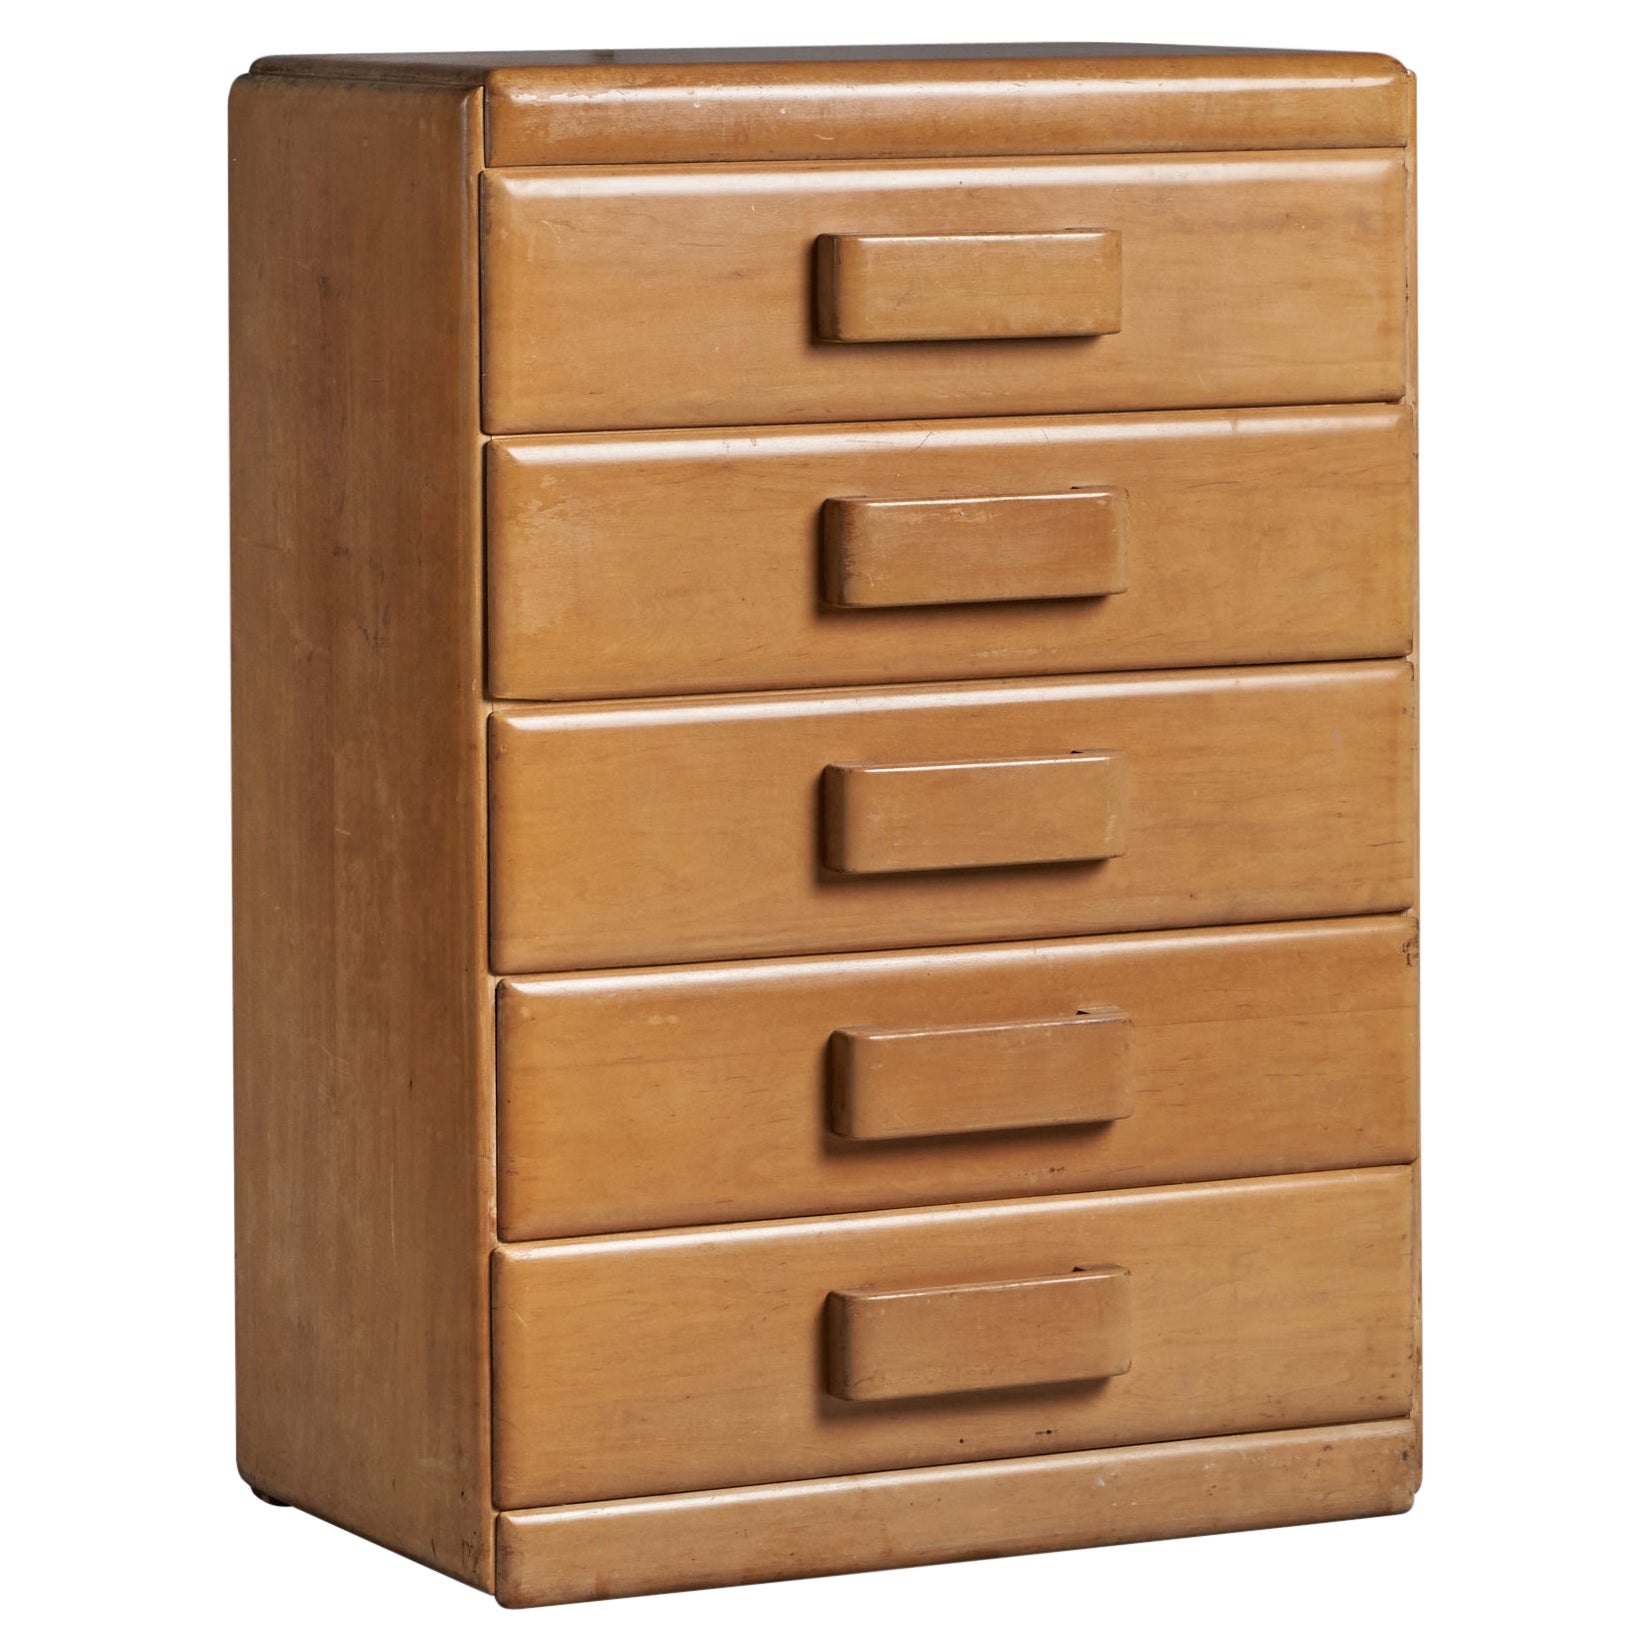 Russel Wright, Chest of Drawers, Mahogany, 1940s